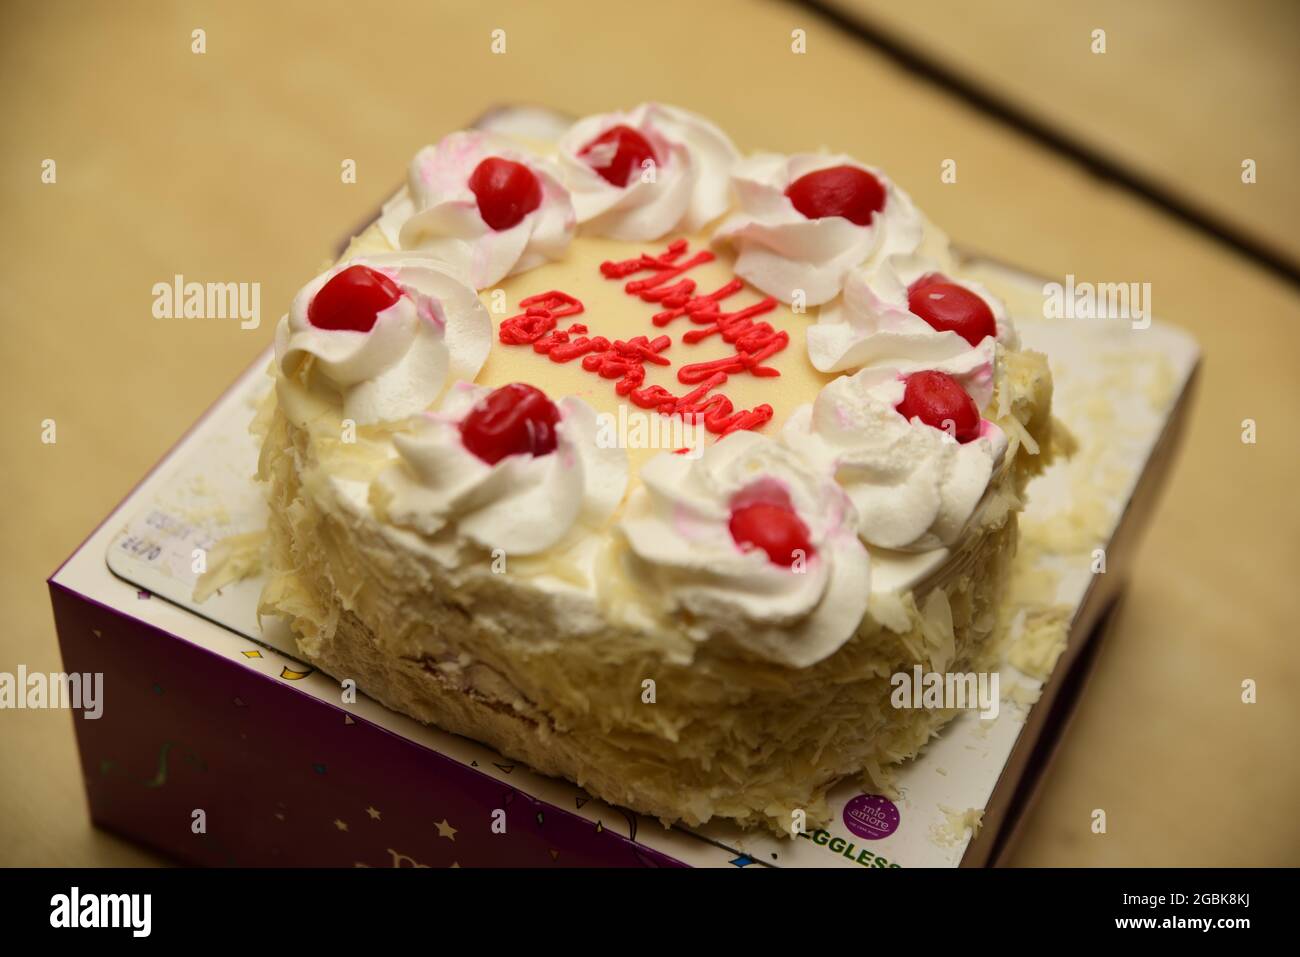 Delicious birthday cake on table close-up Stock Photo